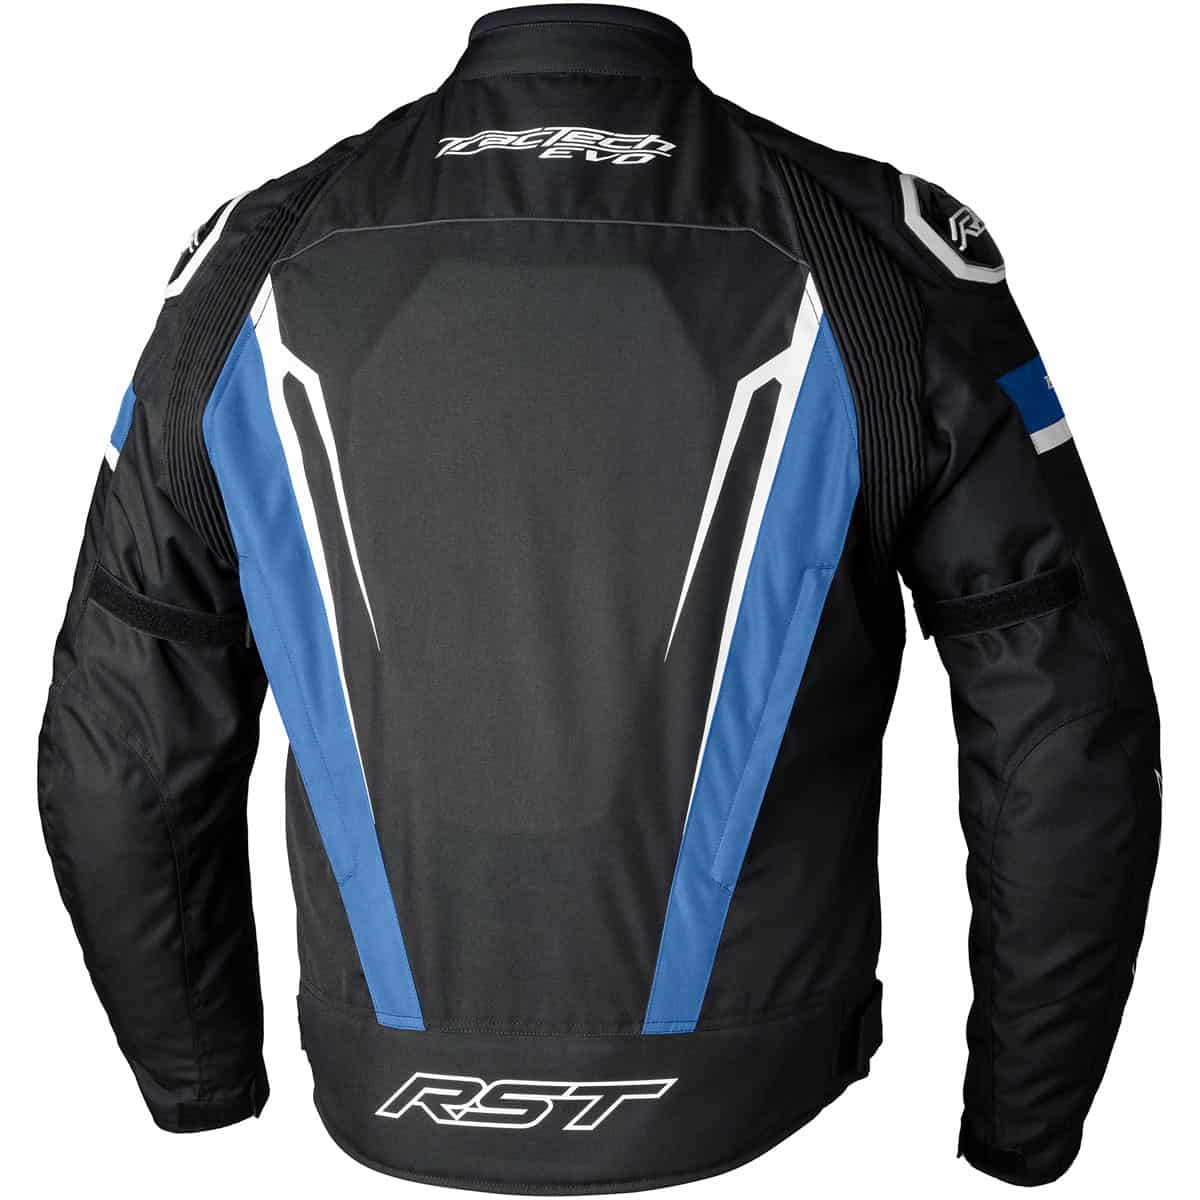 Short, sporty textile motorcycle jacket from RST